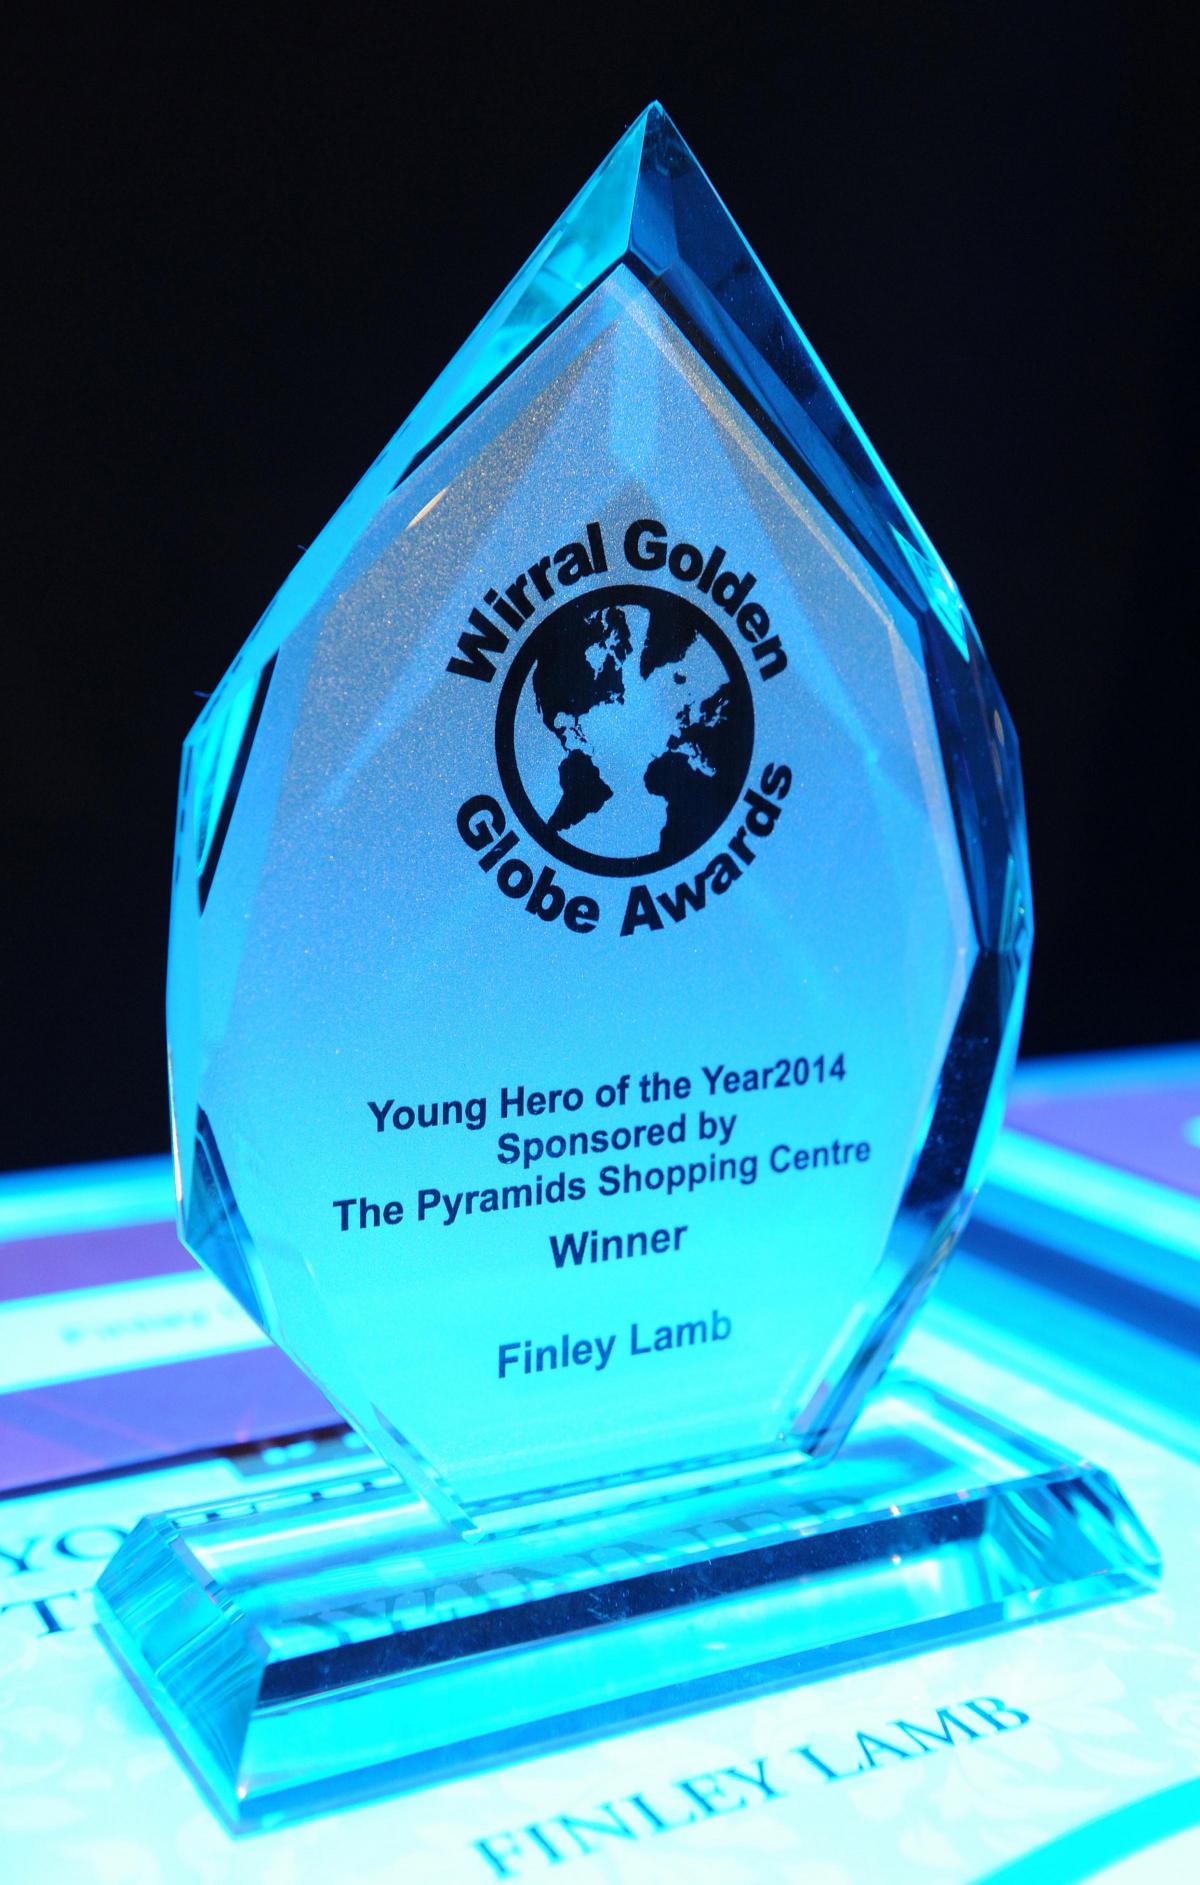 The Young Hero of the Year award awaits its worthy recipient.